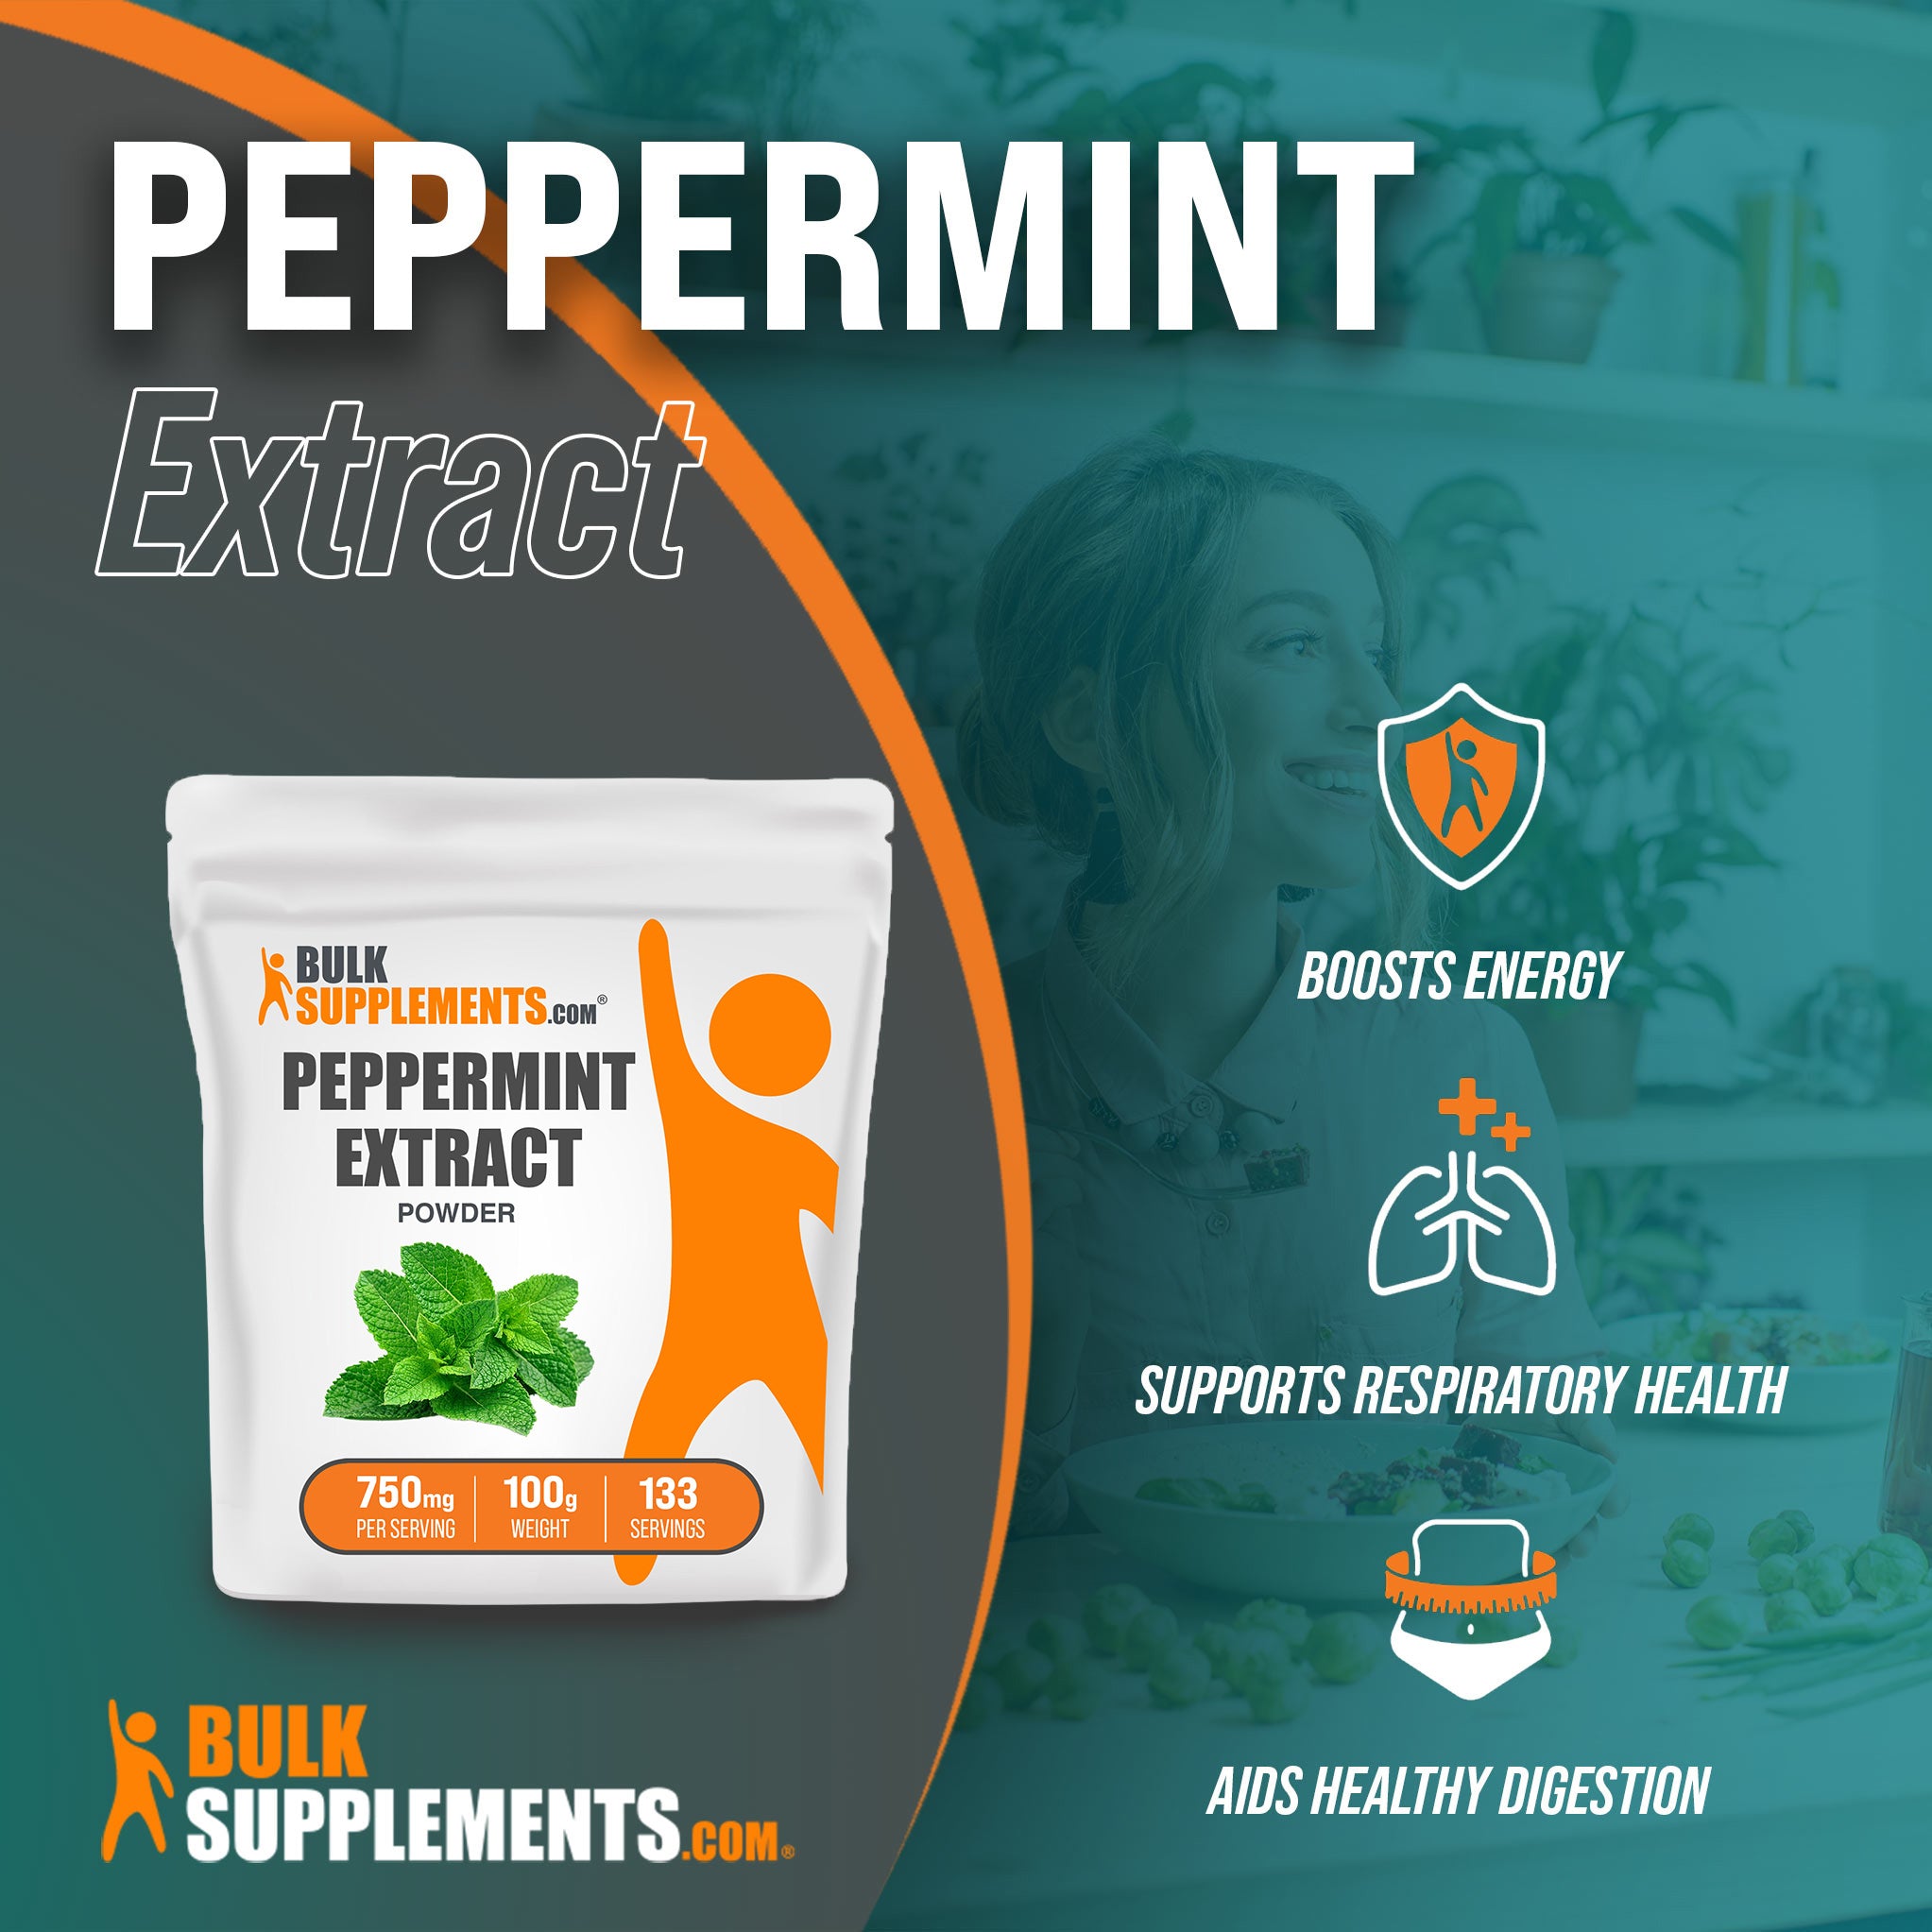 Benefits of Peppermint Extract: boosts energy, supports respiratory health, aids healthy digestion